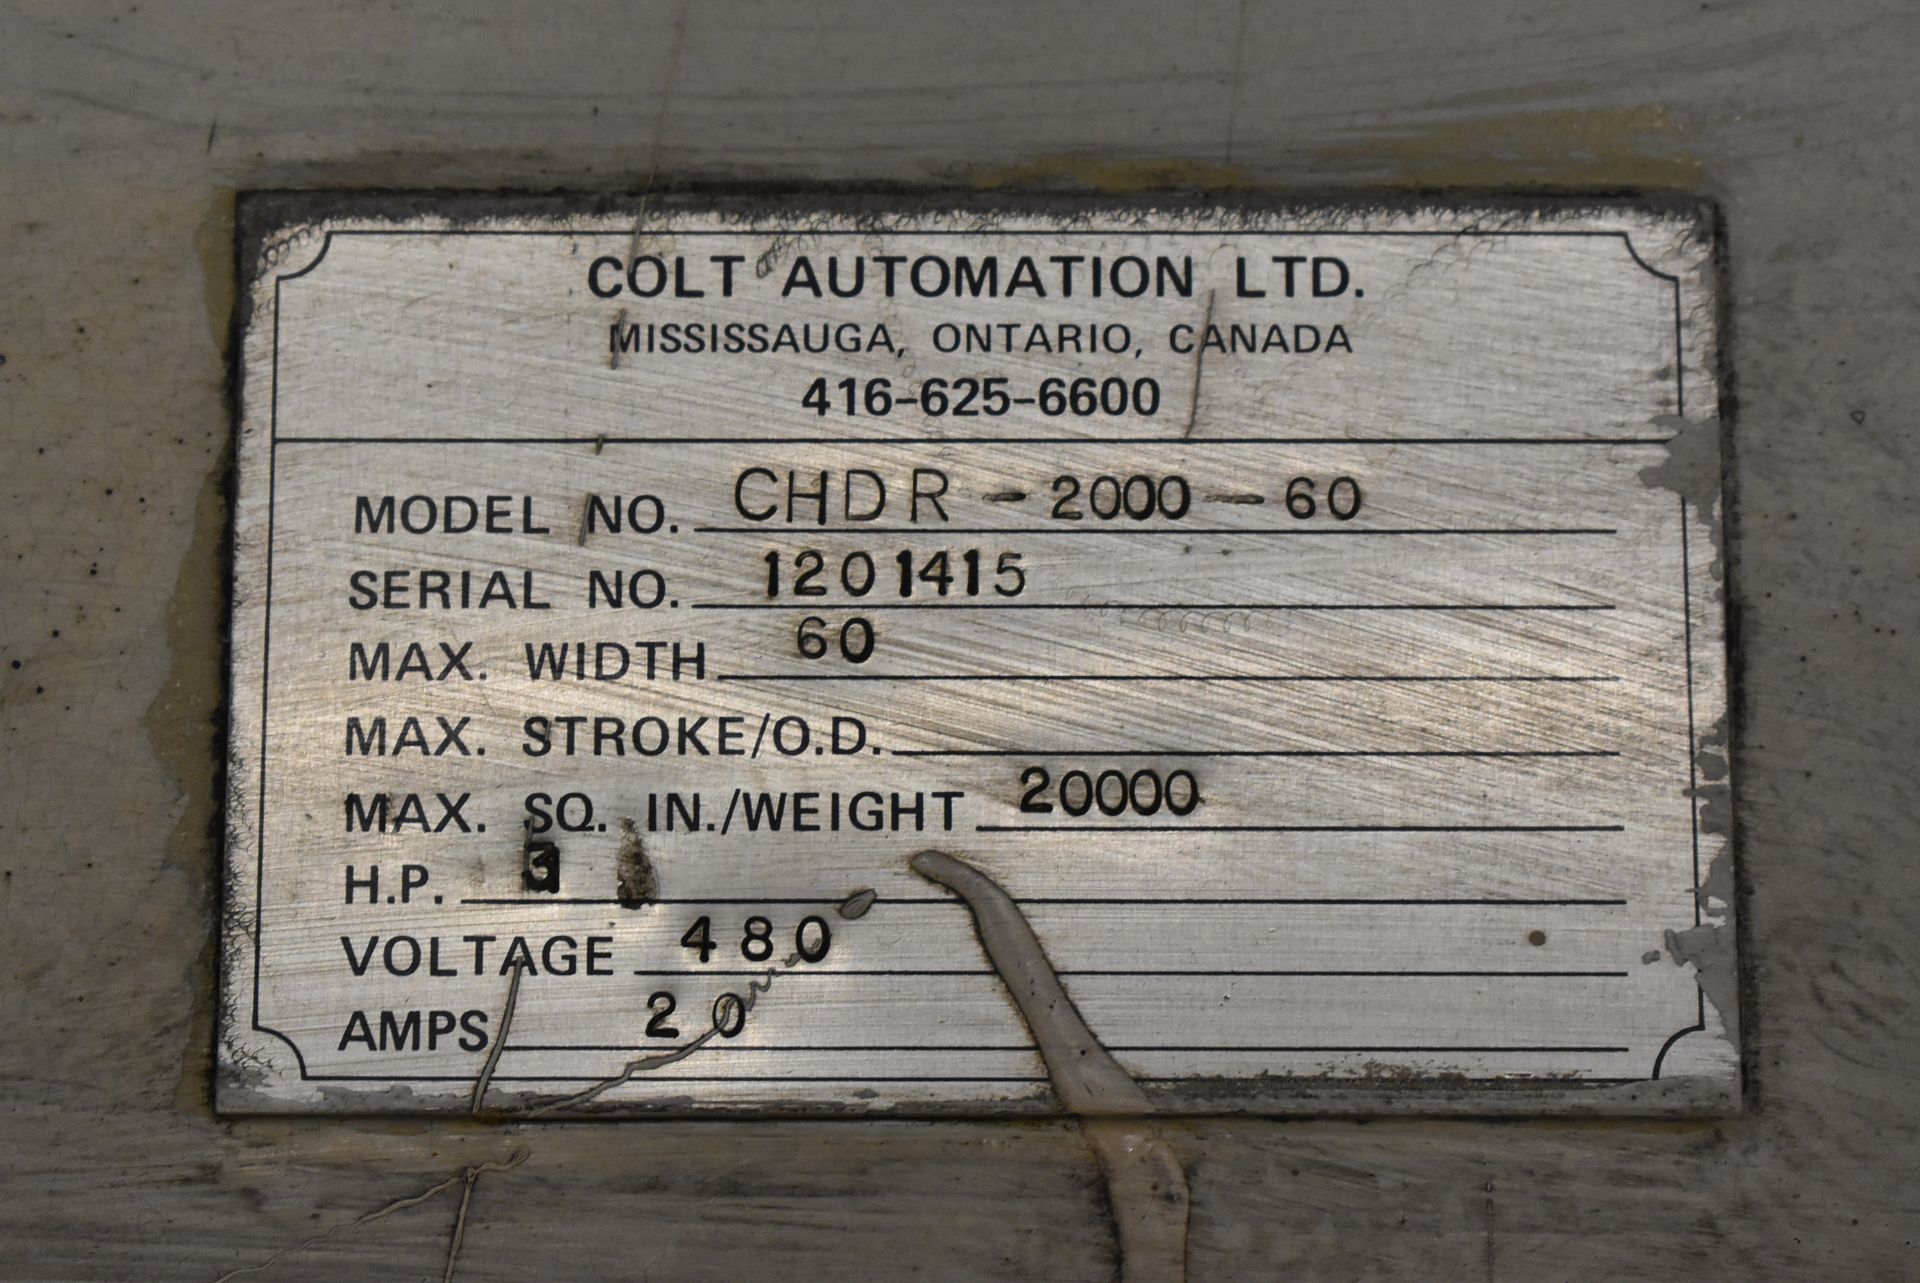 COLT CHDR-2000-60 MANDREL-TYPE MOTORIZED UNCOILER WITH 20,000 LB. CAPACITY, 60" MAX. WIDTH, 3 HP, - Image 6 of 10